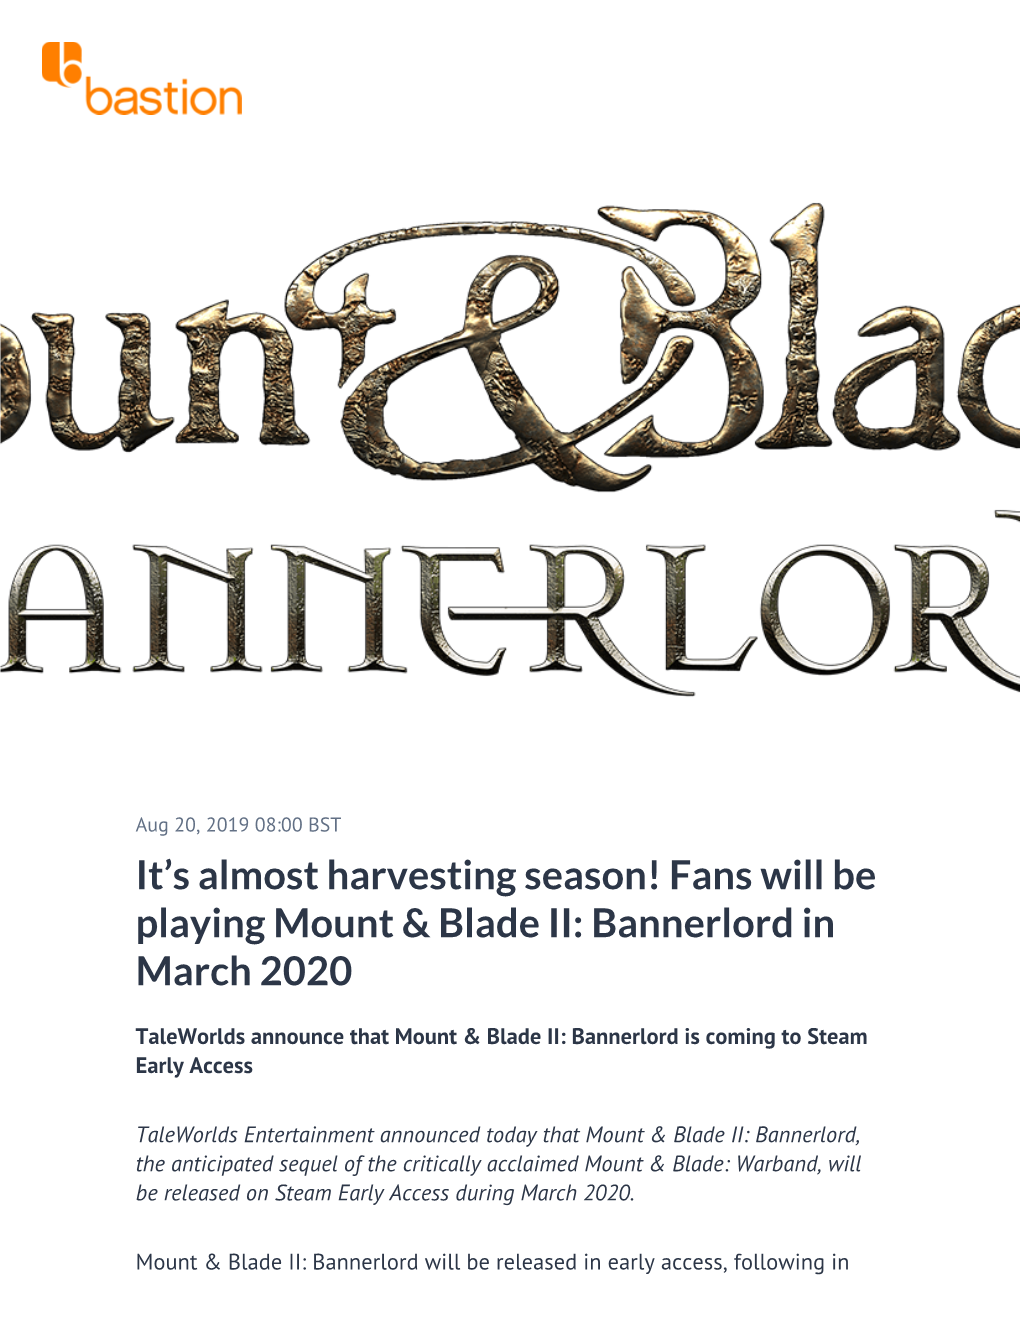 It's Almost Harvesting Season! Fans Will Be Playing Mount & Blade II